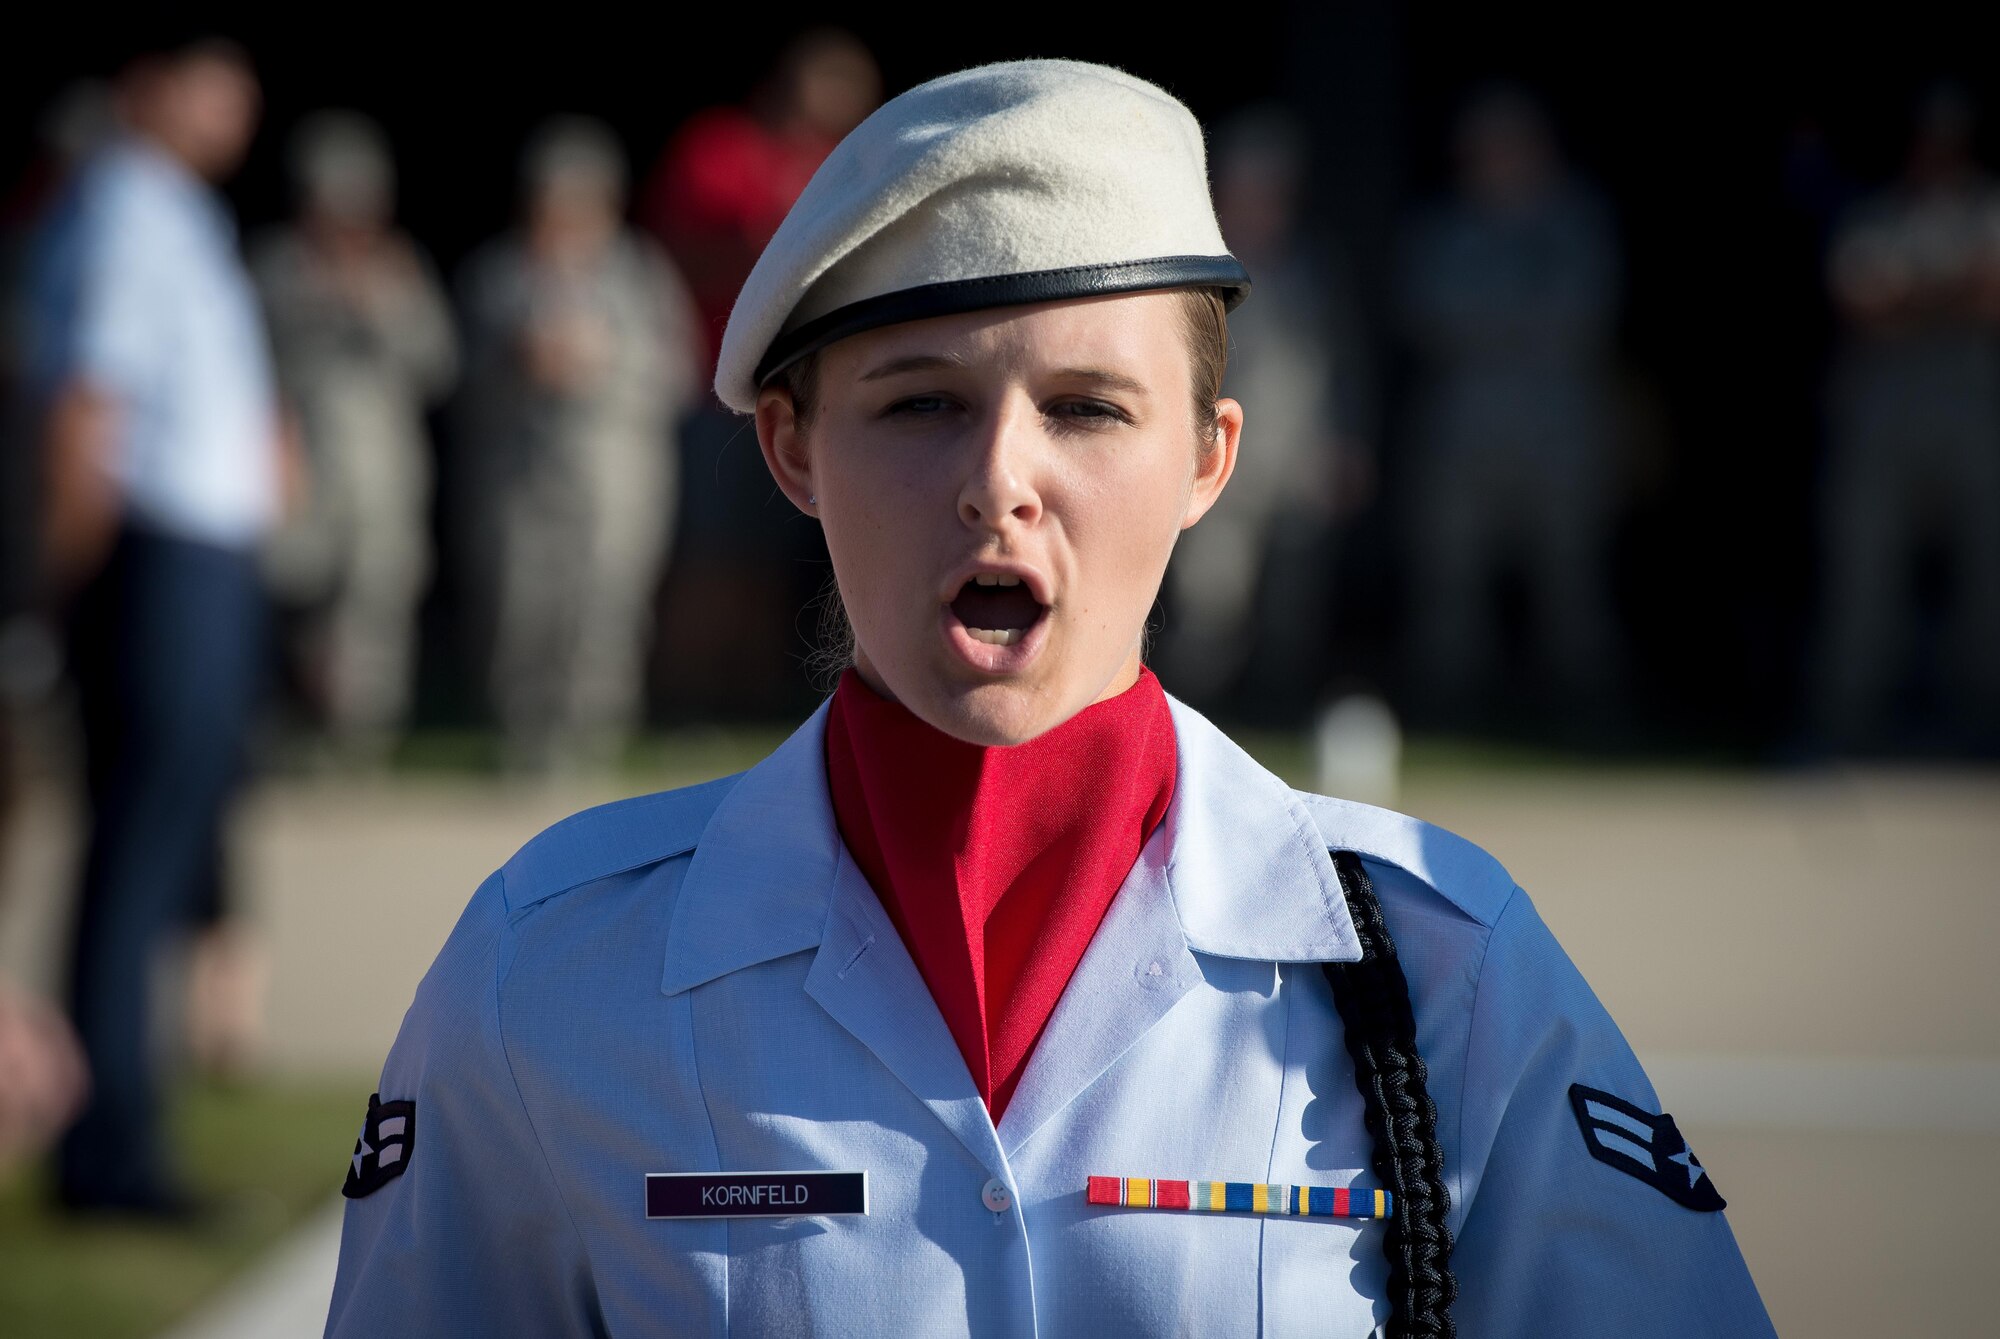 Airman 1st Class Kaleigh Kornfeld, 336th Training Squadron student, leads the regulation drill team during the 81st Training Group drill down at the Levitow Training Support Facility drill pad Sept. 8, 2017, on Keesler Air Force Base, Mississippi. Airmen from the 81st TRG compete in a quarterly open ranks inspection, regulation drill routine and freestyle drill routine. The 334th TRS “Gators” took first place this quarter. (U.S. Air Force photo by Tech. Sgt. Ryan Crane)